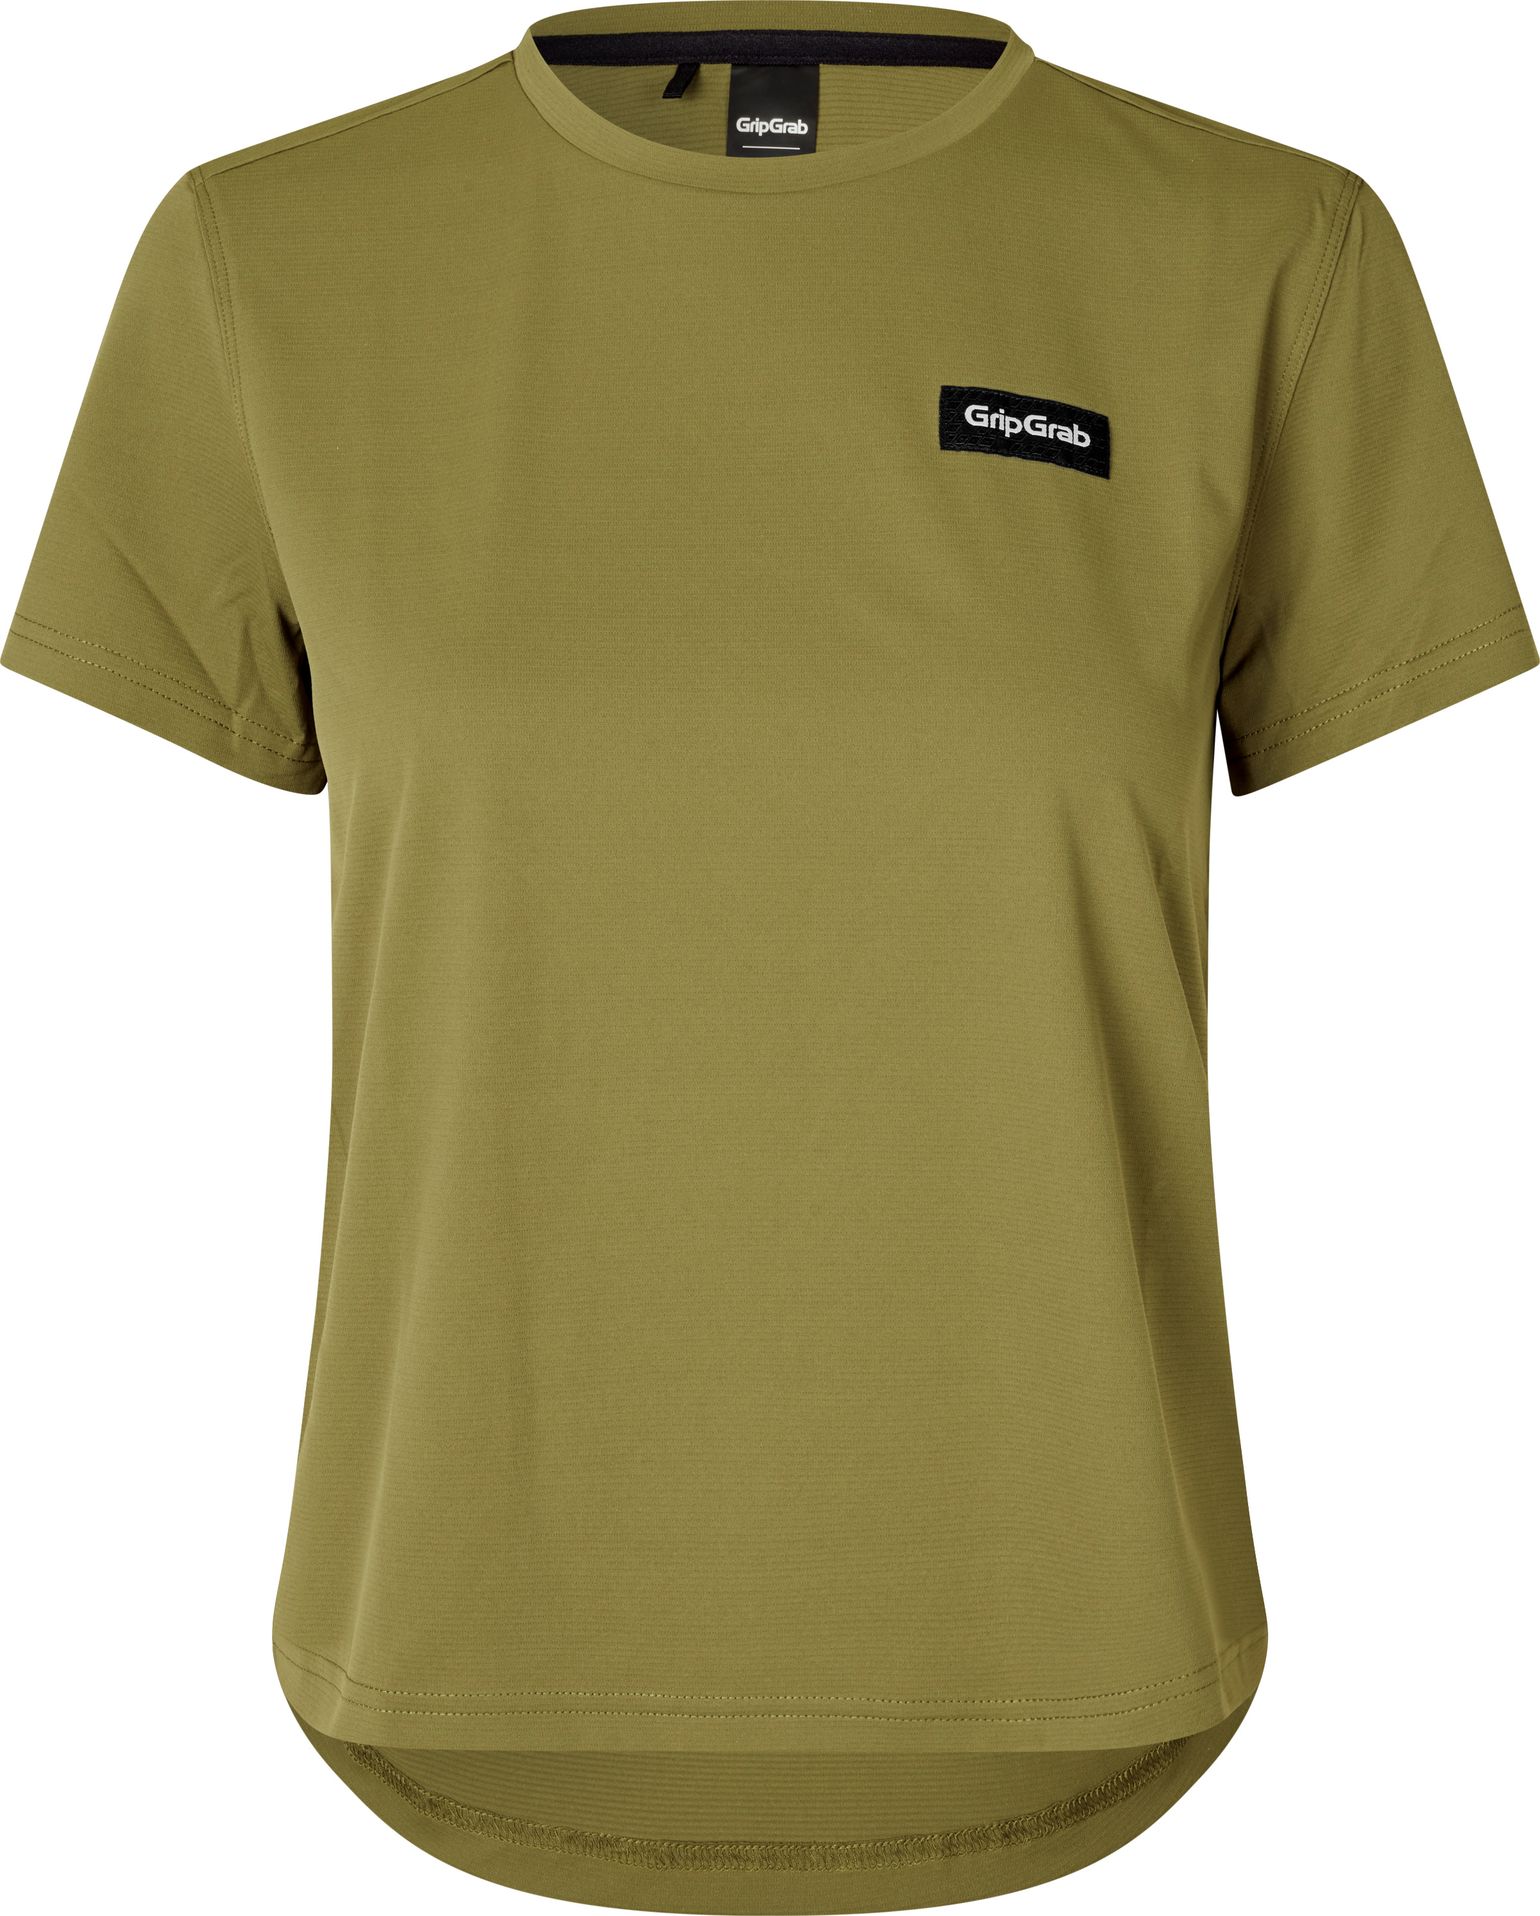 Gripgrab Women's Flow Technical T-Shirt Olive Green